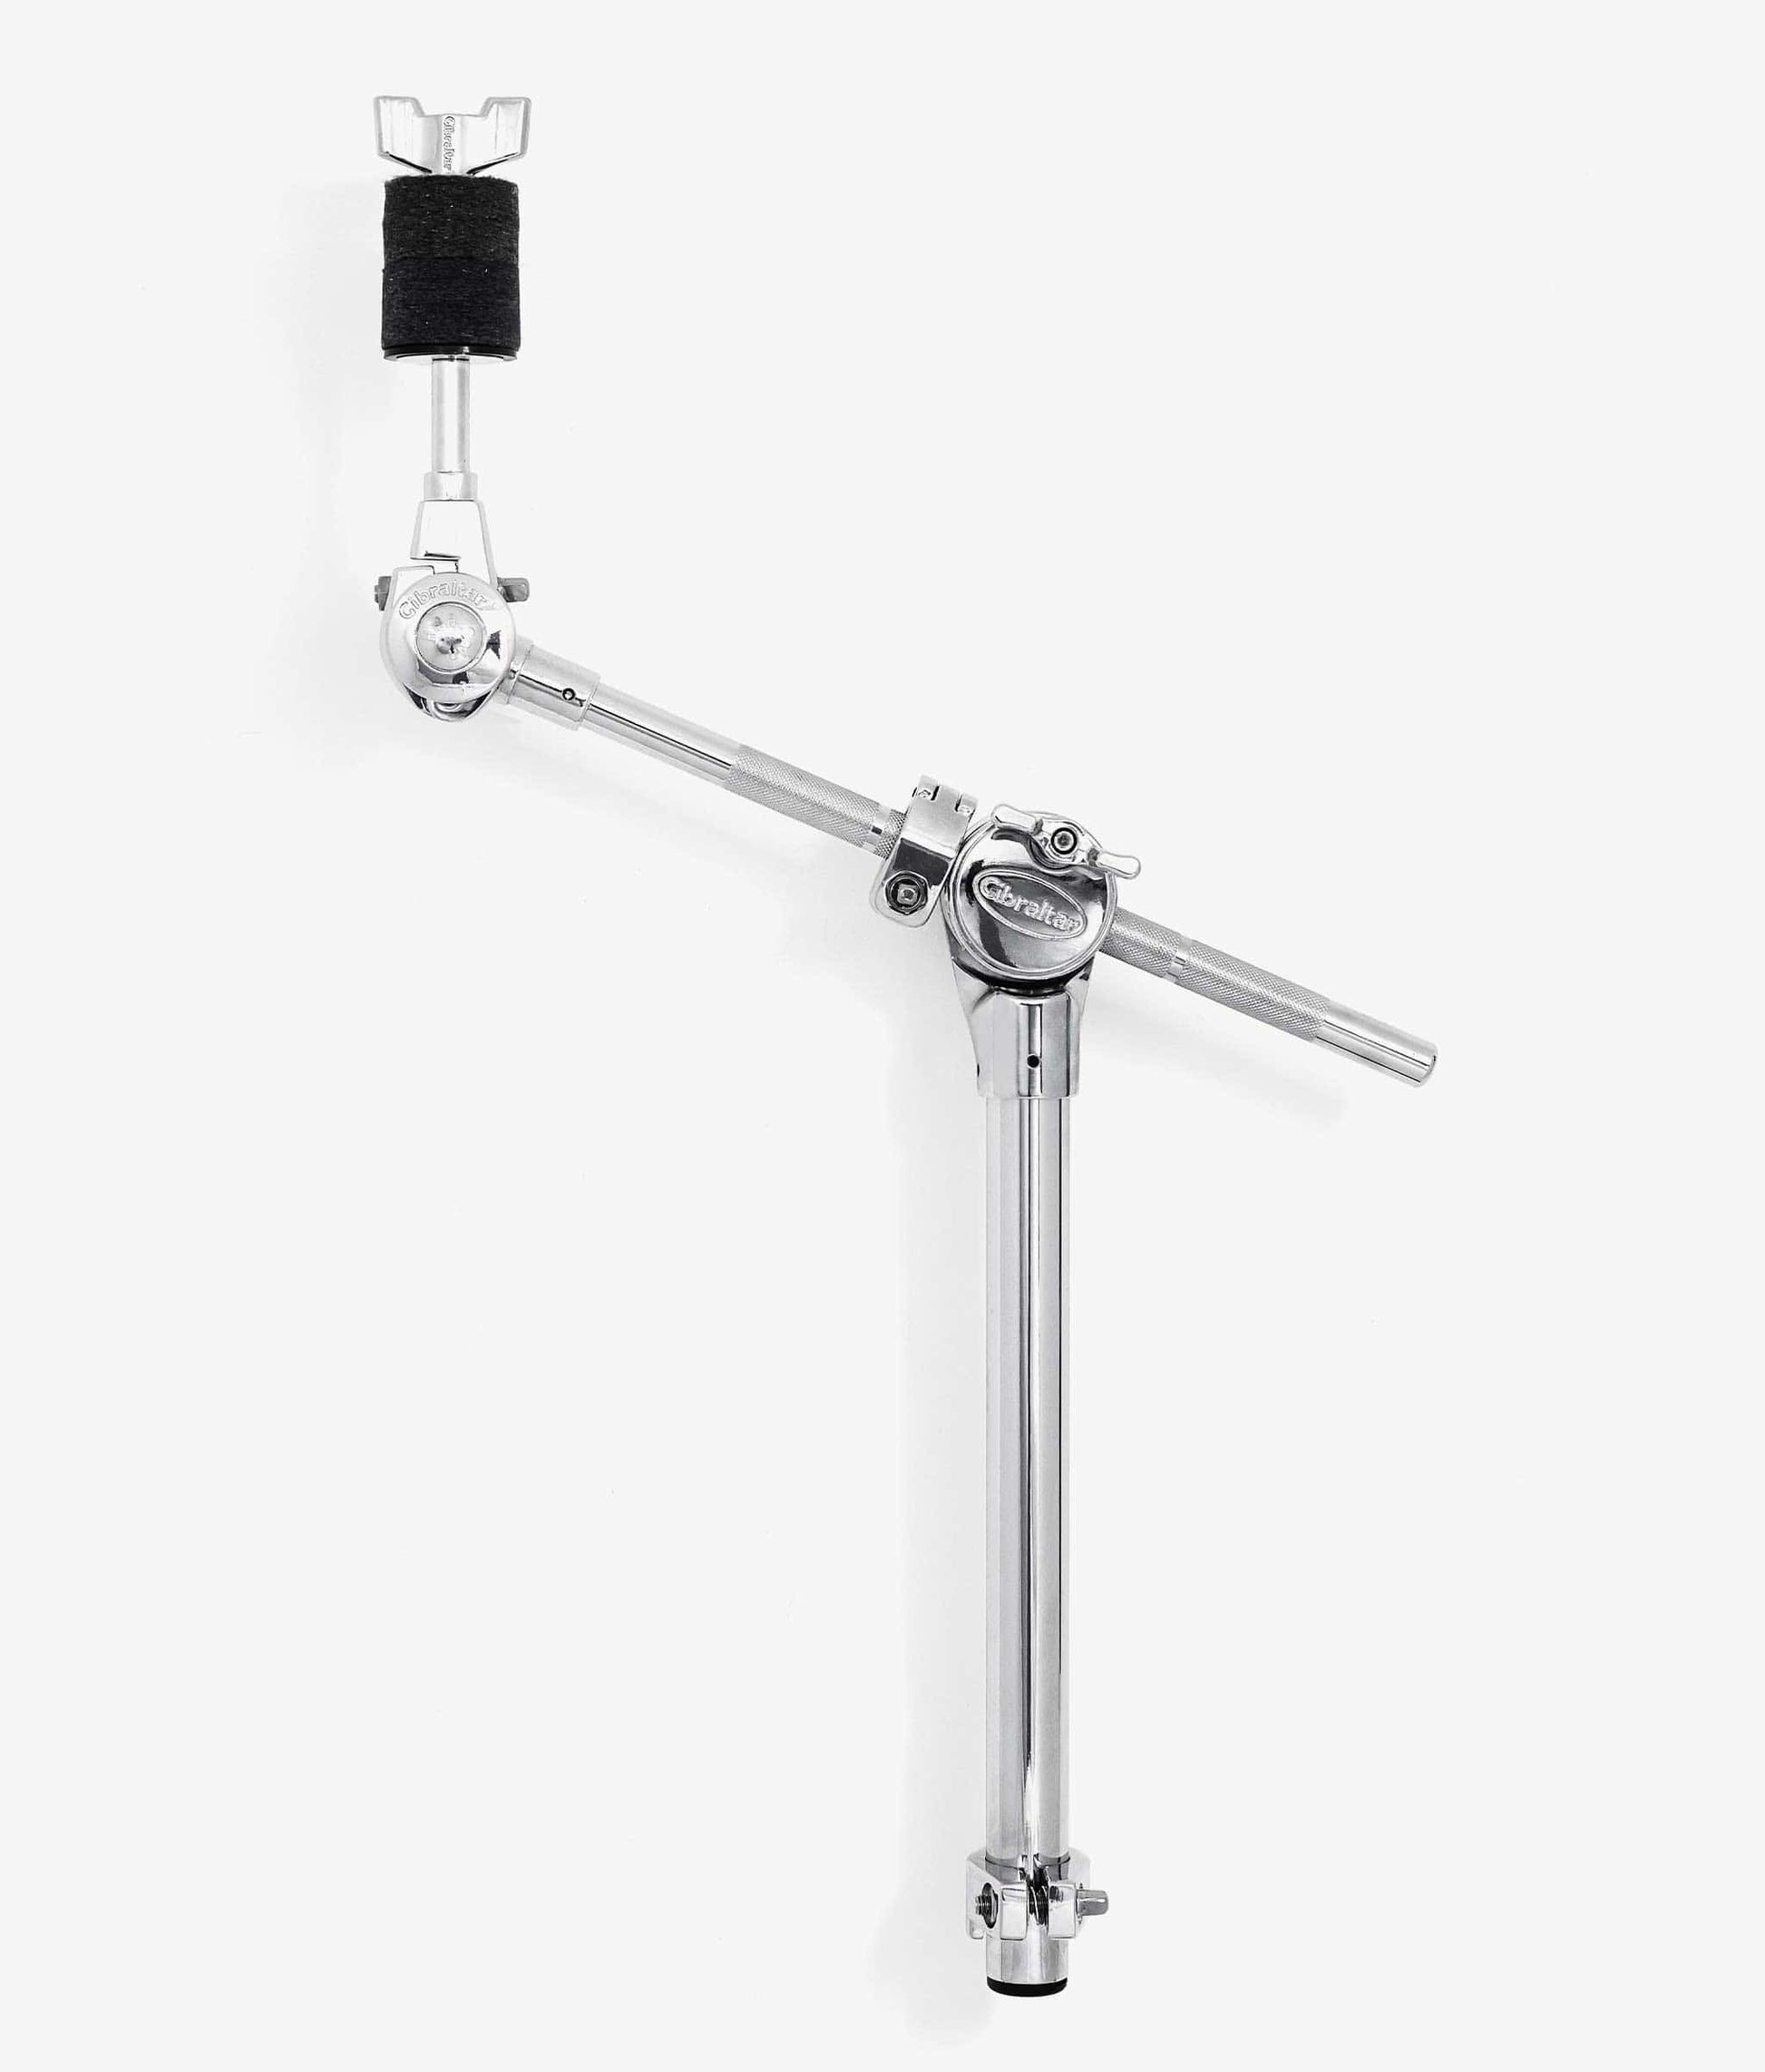  Gibraltar SC-SBBT 12" Cymbal Boom Arm with Gearless Brake Tilter cymbal boom arm